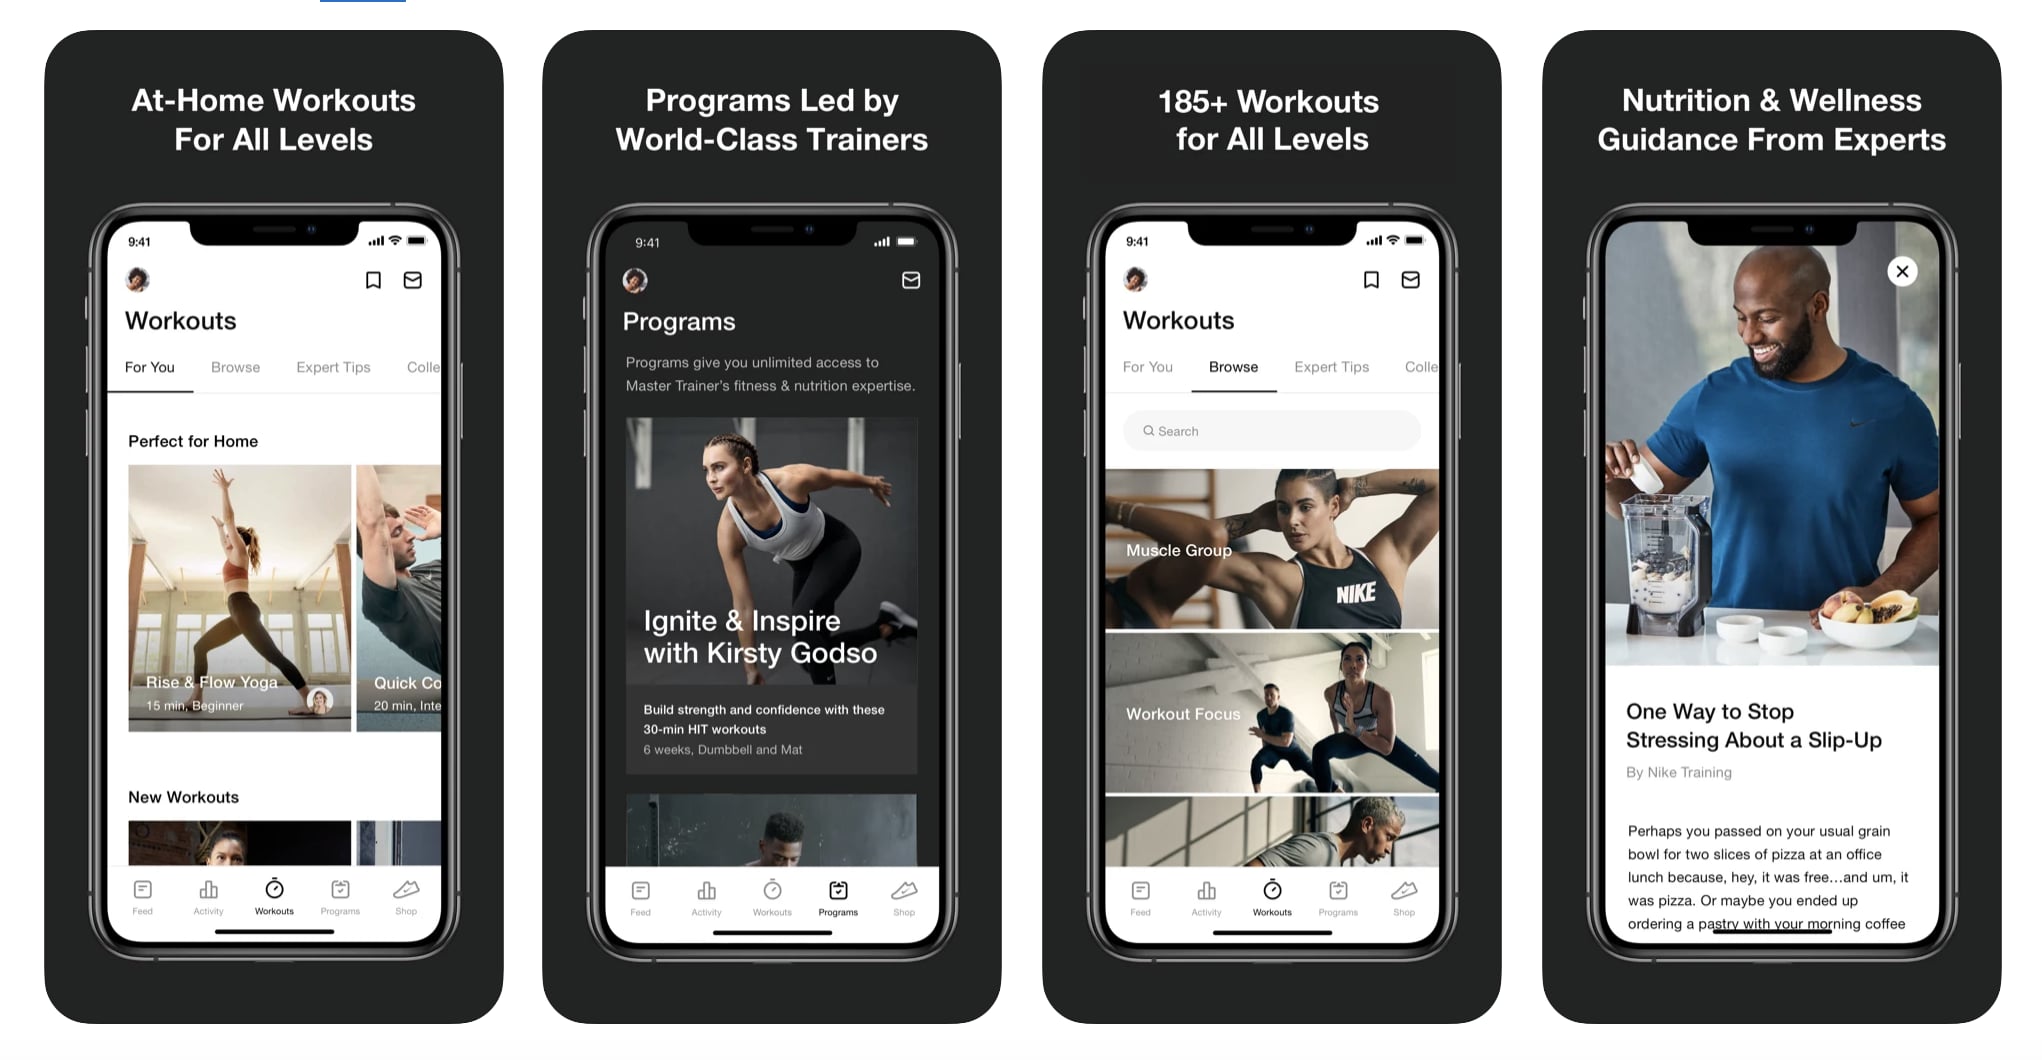 Infidelidad raqueta Desfiladero Nike Training Club | The Digital Workout Apps and Platforms That Got Our  Editors Sweating at Home in 2020 | POPSUGAR Fitness Photo 3